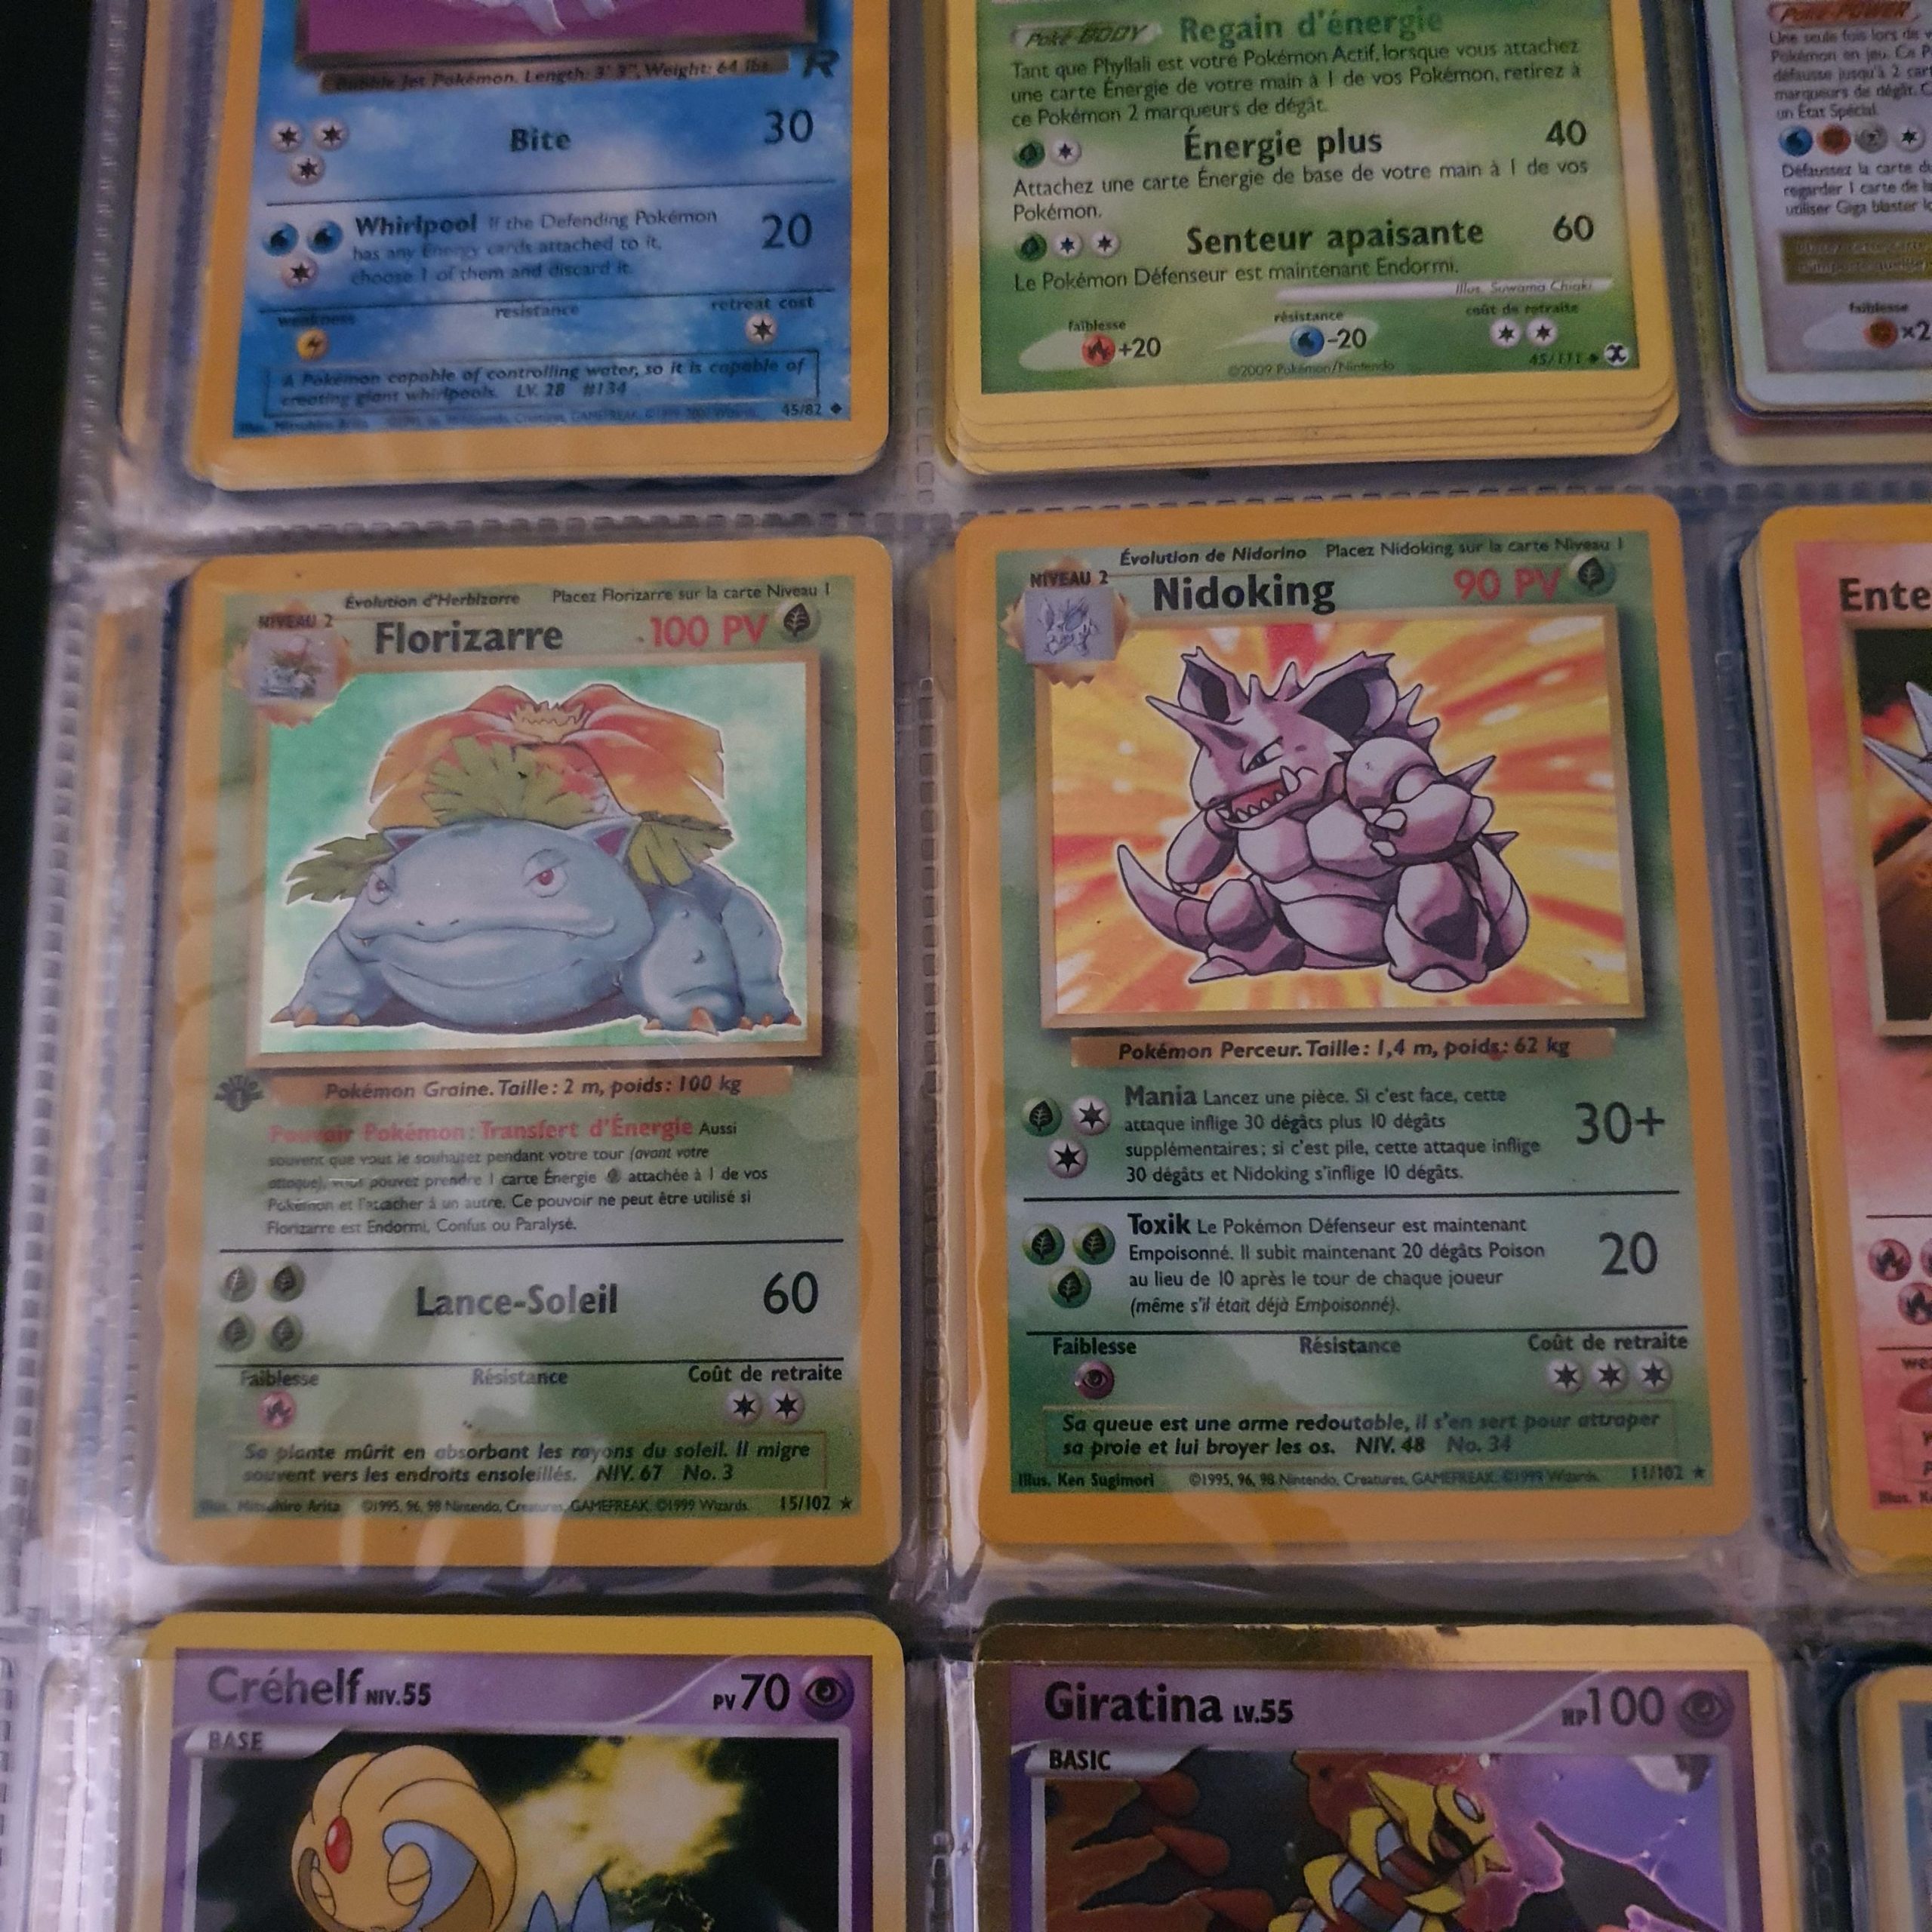 Should I sell my old pokemon card collection or wait a bit longer? I ...